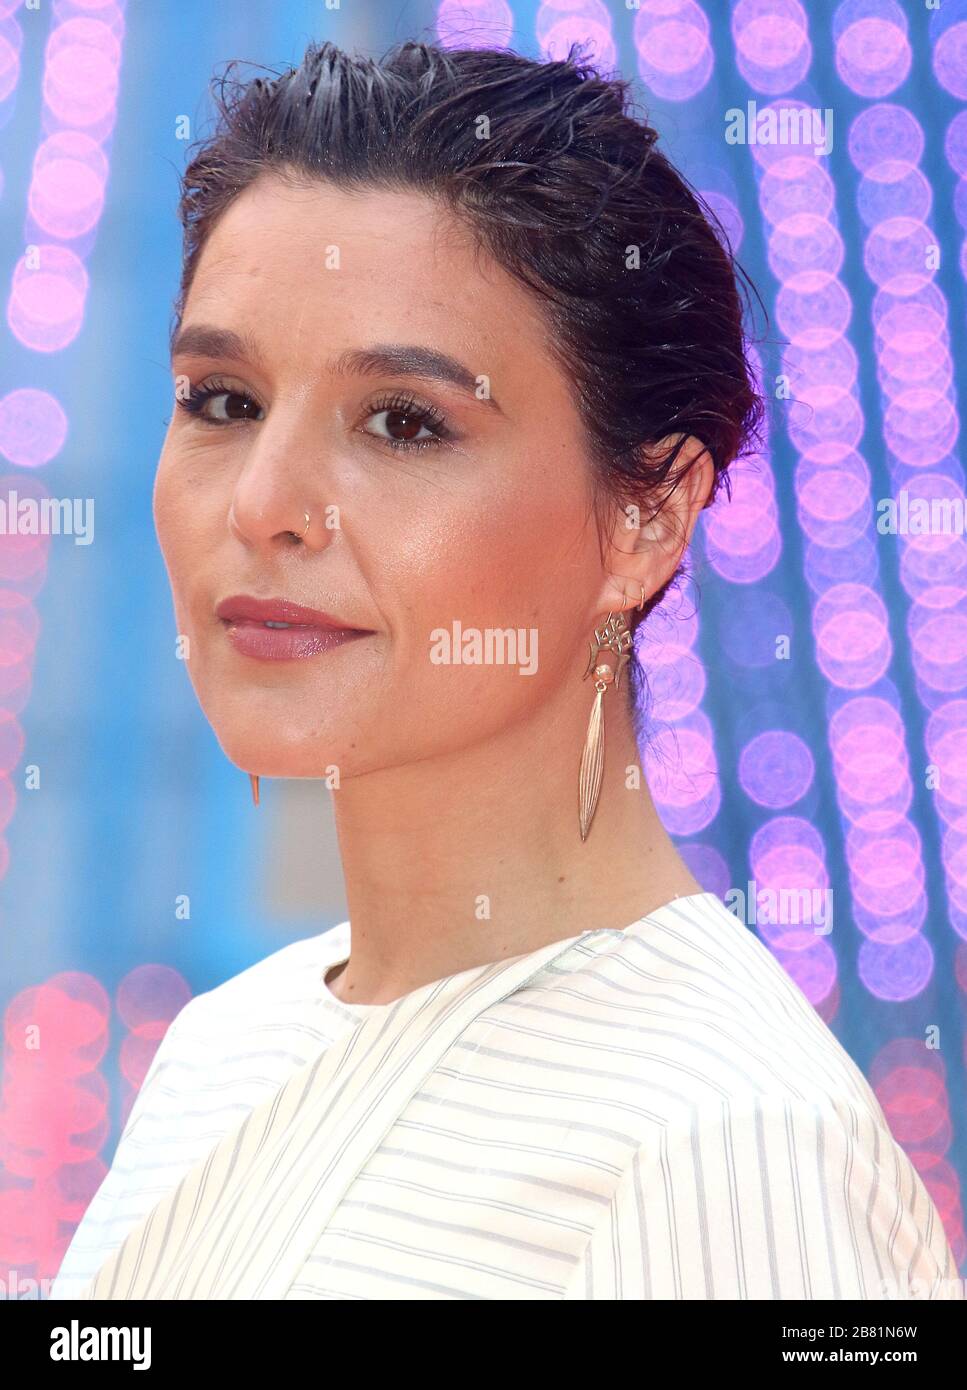 07 giugno 2017 - Londra, Inghilterra, Regno Unito - Royal Academy Summer Exhibition 2017 Preview Party, Royal Academy of Arts, Piccadilly - Jessie Ware Foto Stock